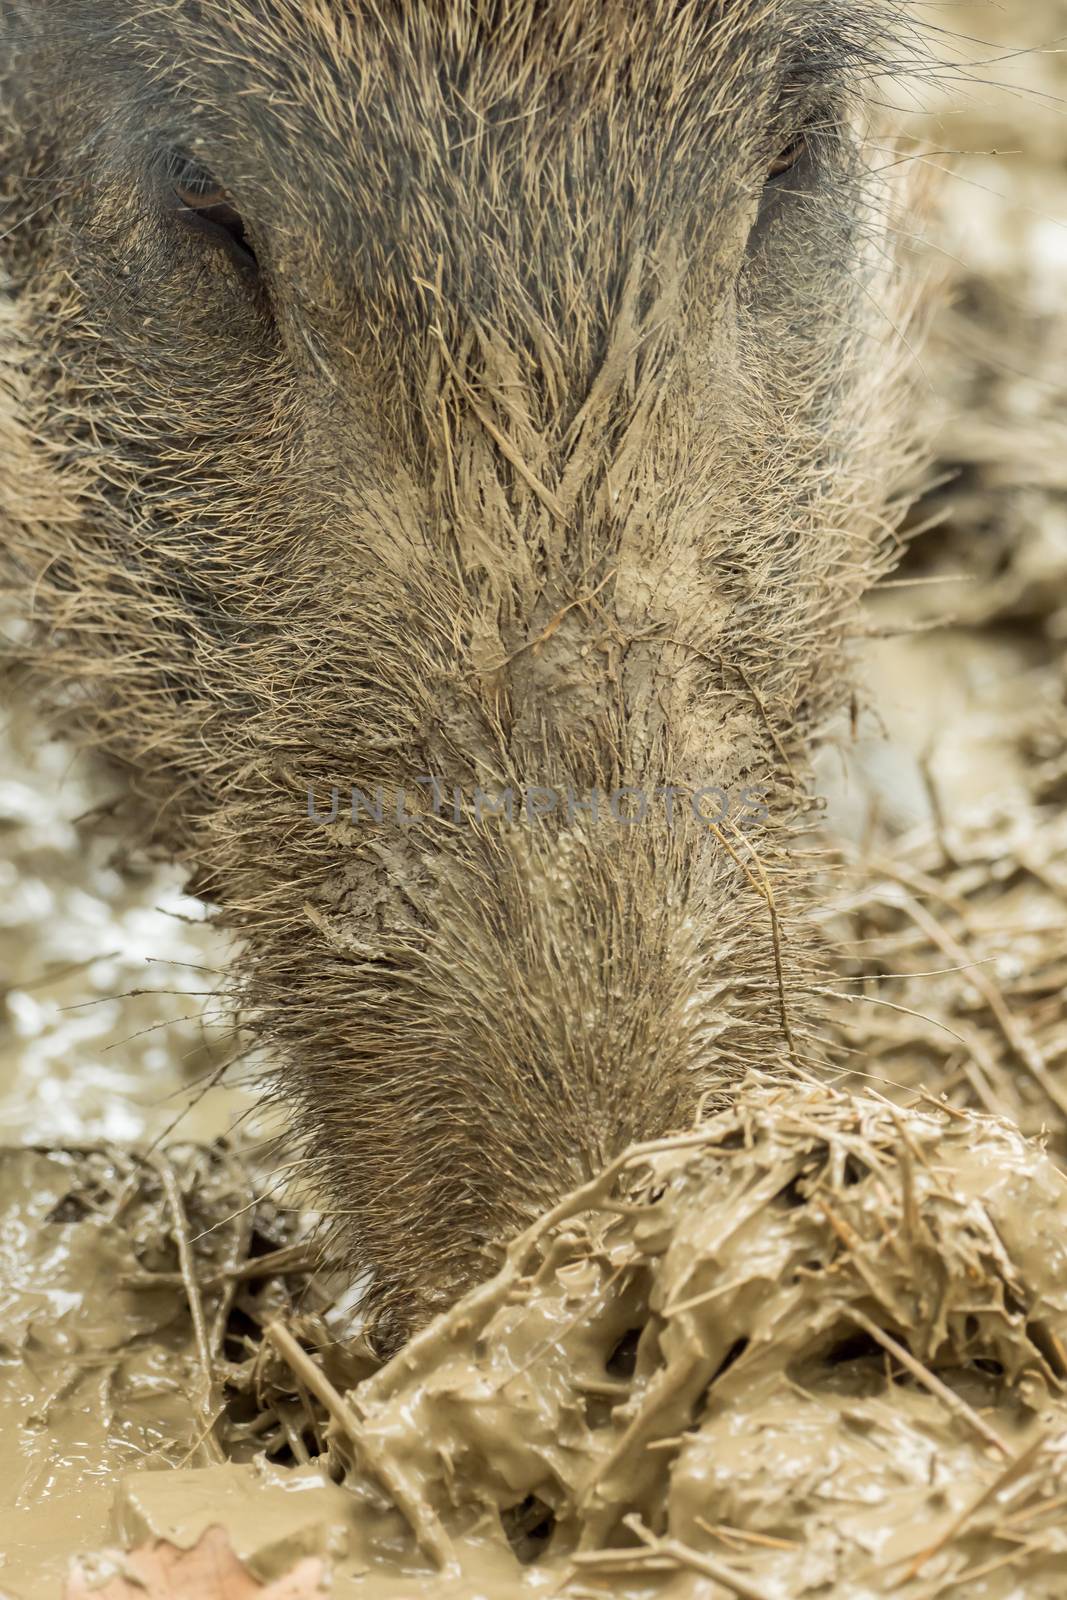 A boar is looking for food in the wet mud